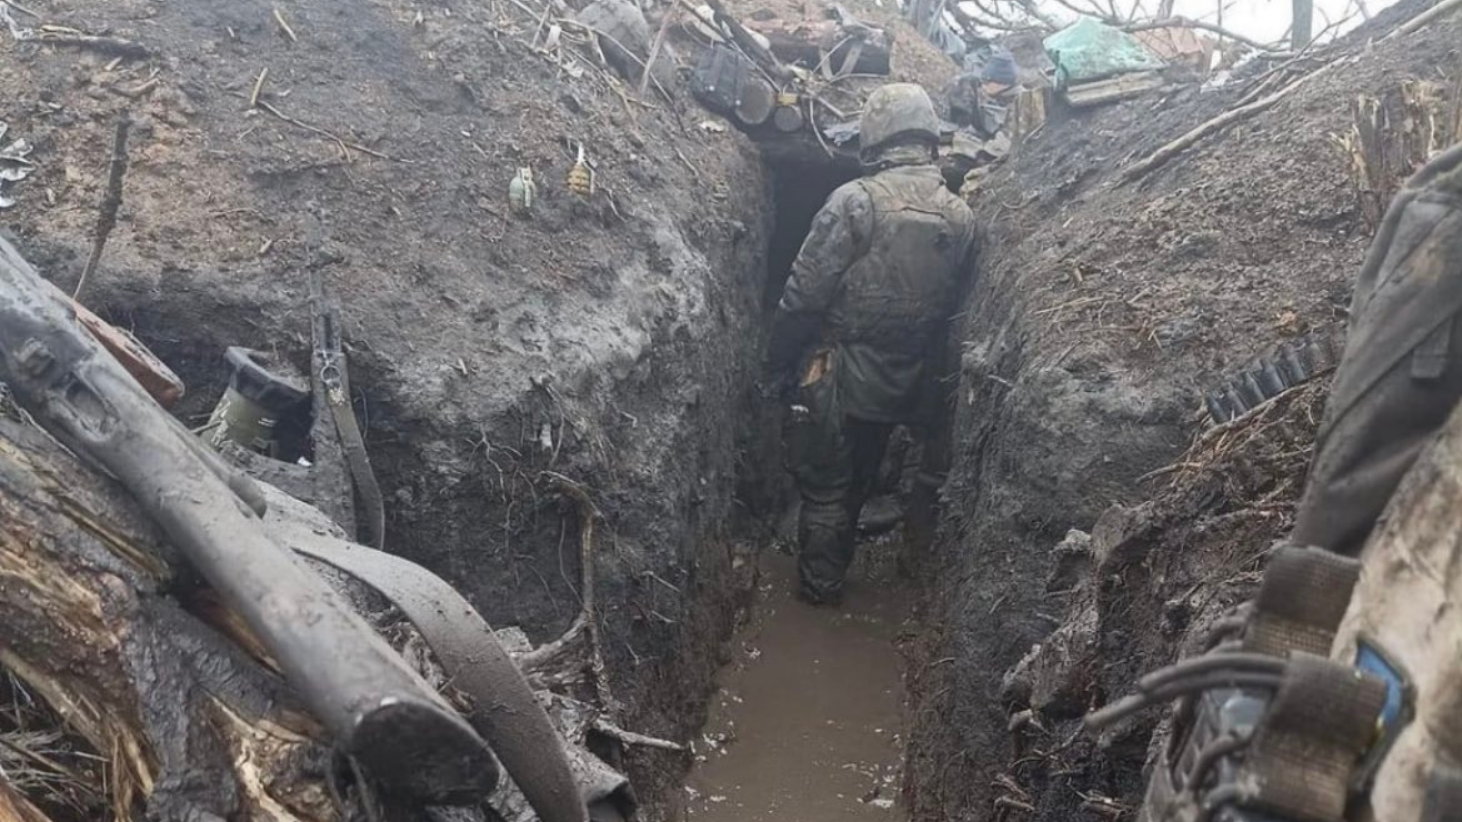 The Role of Snipers in the Donbas Trench War - Jamestown